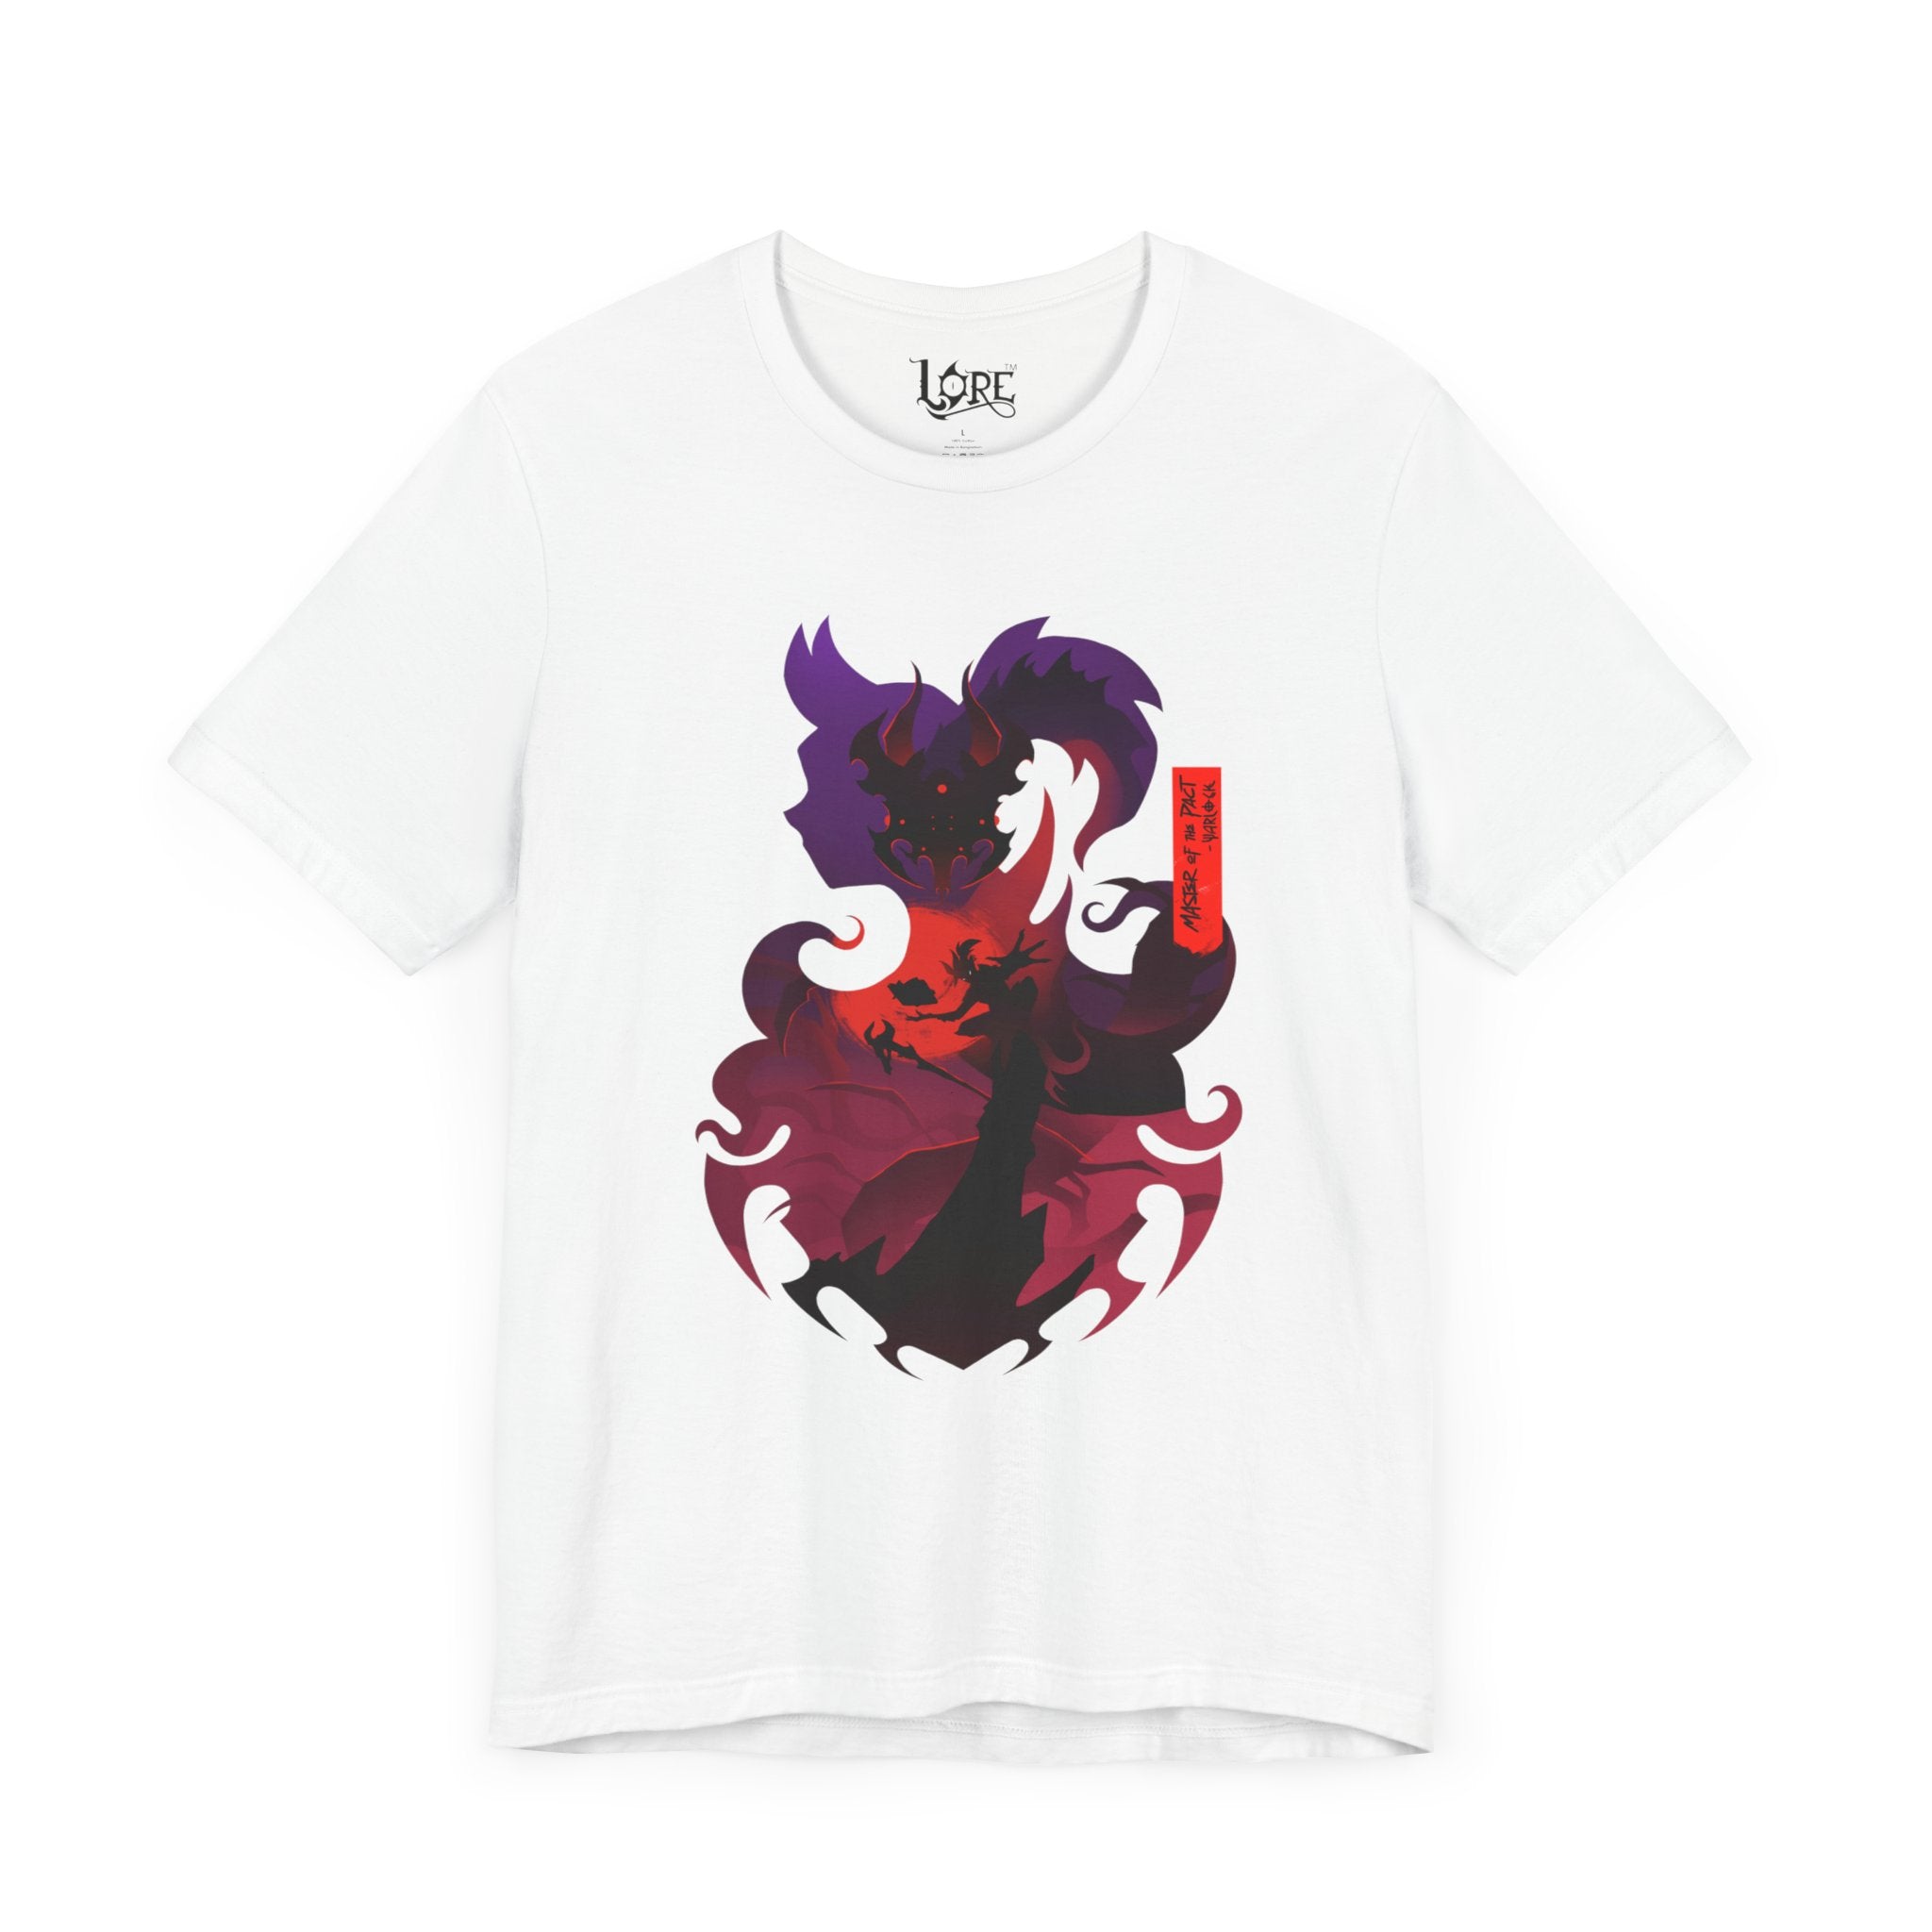 WARLOCK CLASS SILHOUETTE T-SHIRT - RED BANNER EDITION